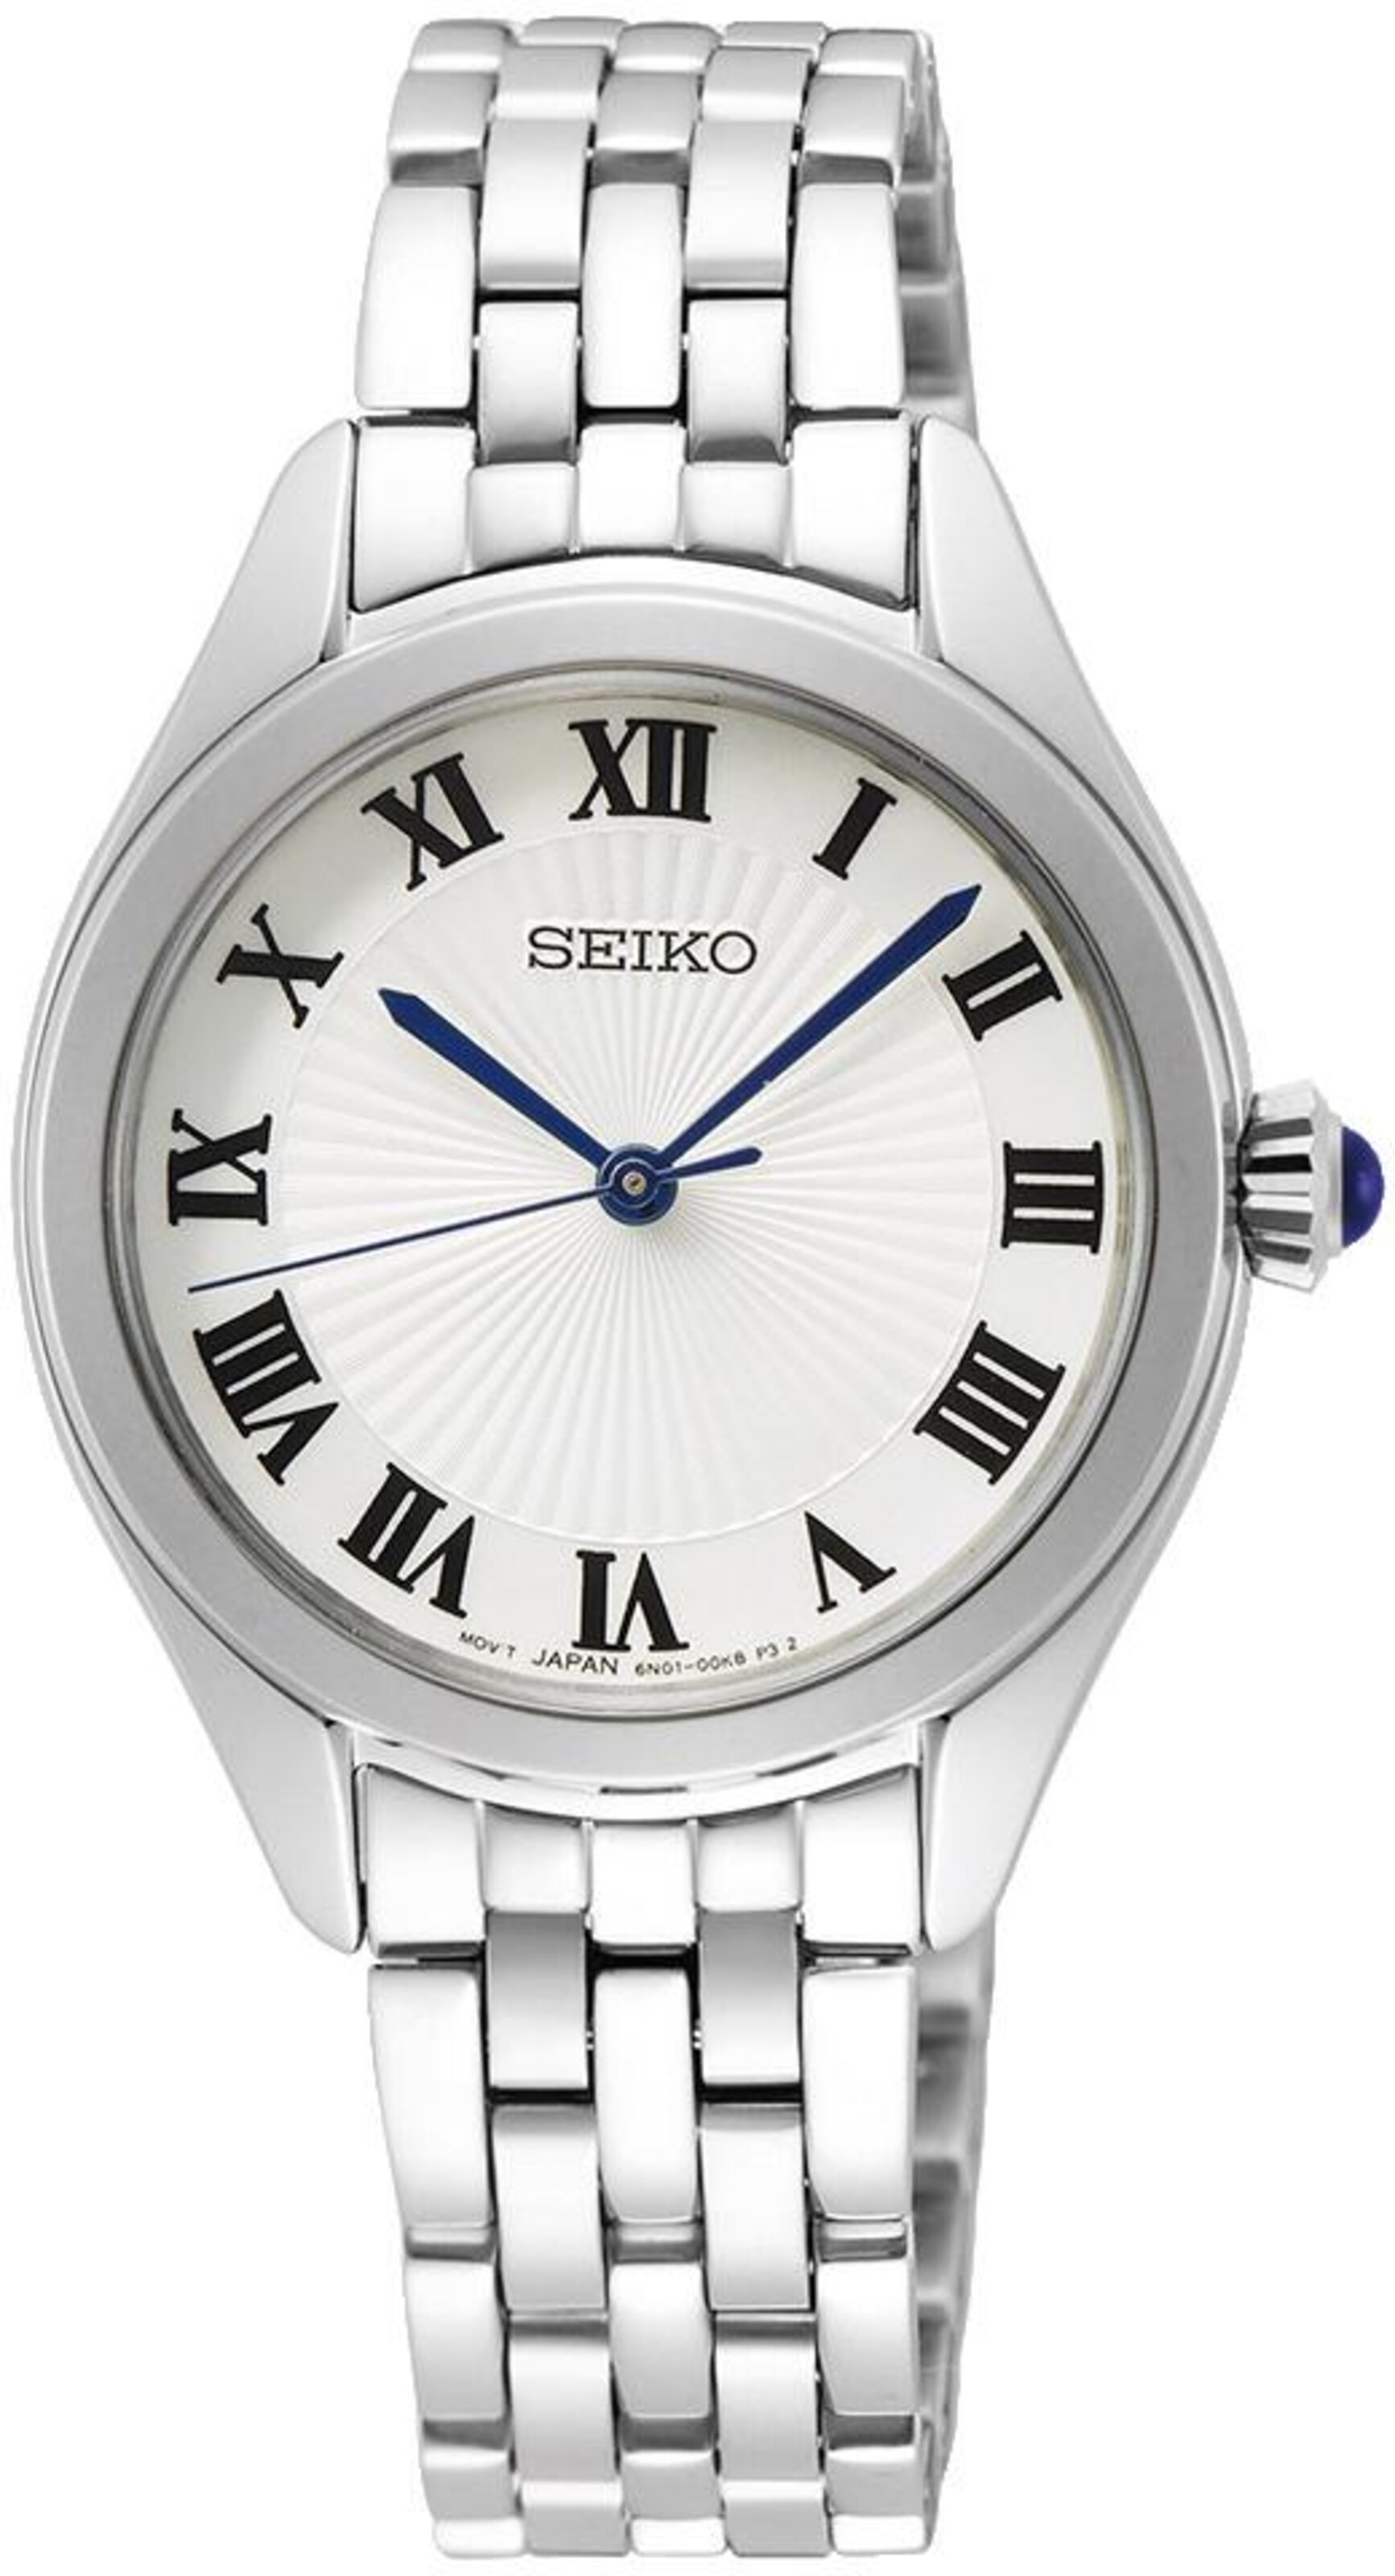 SEIKO Analoguhr Cabochon, SUR327P1 in Silber 